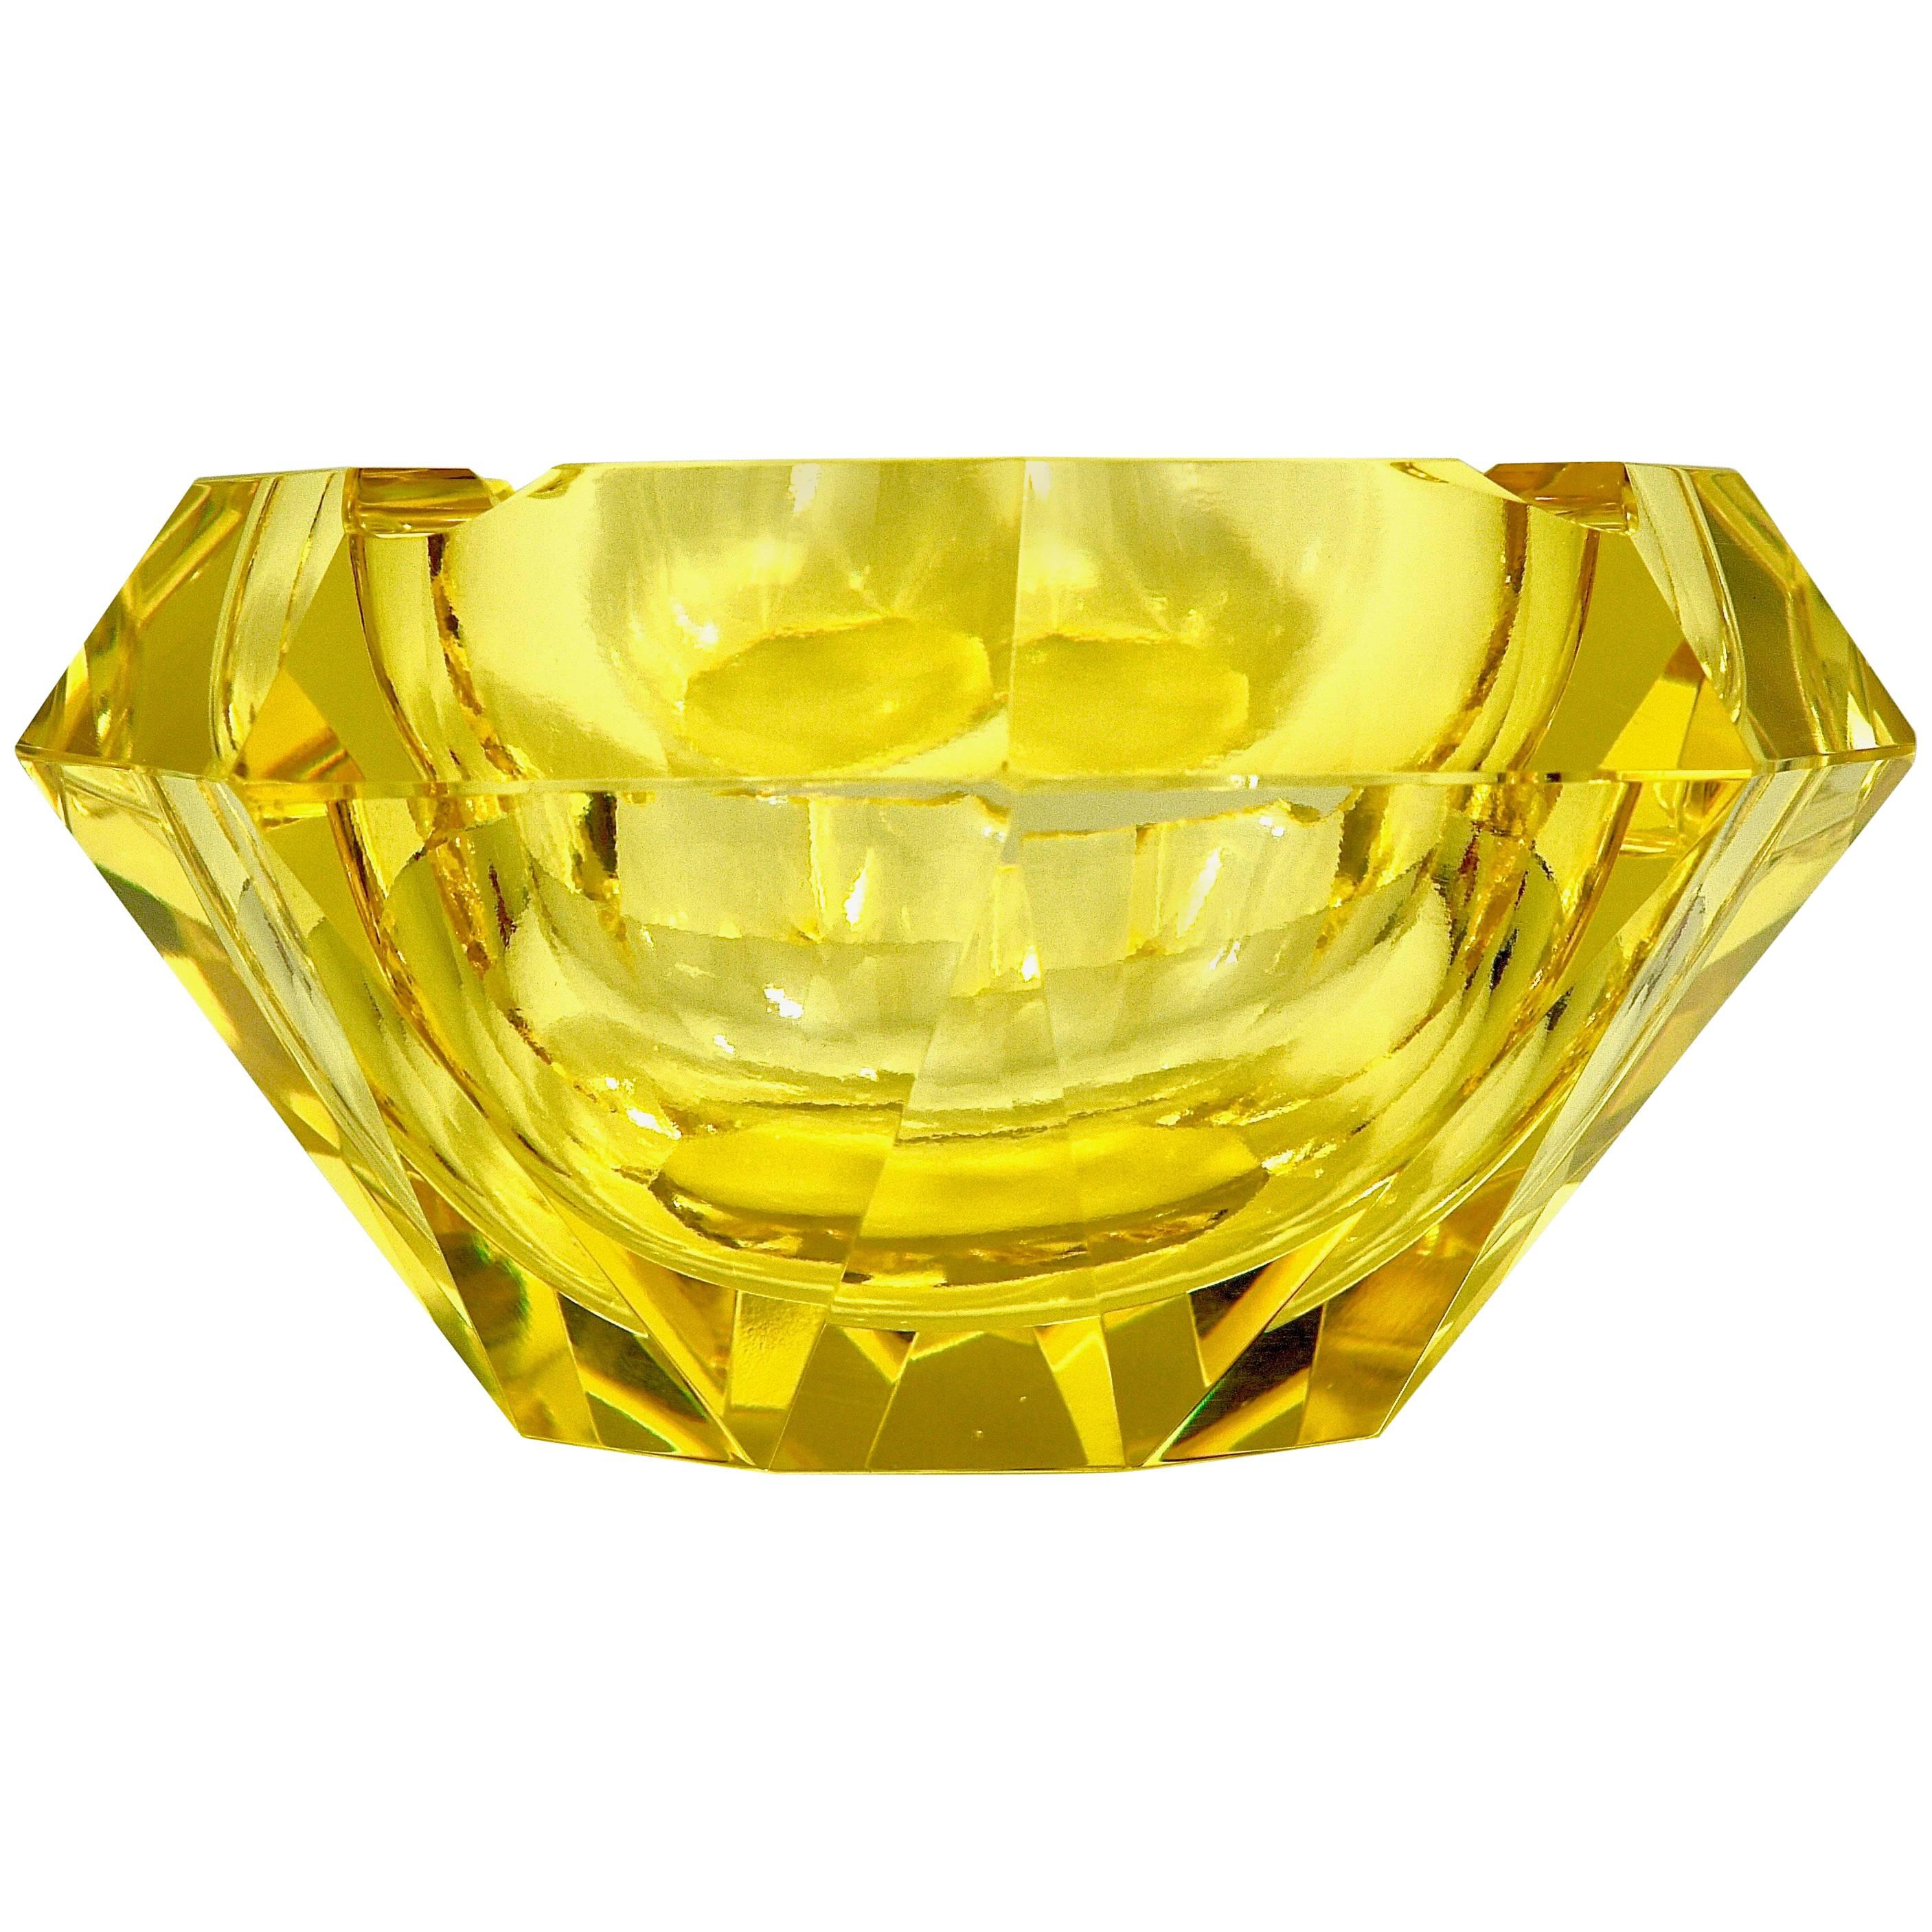 1930s Lemon Faceted Diamond Ashtray in Excellent Condition, Murano, Italy